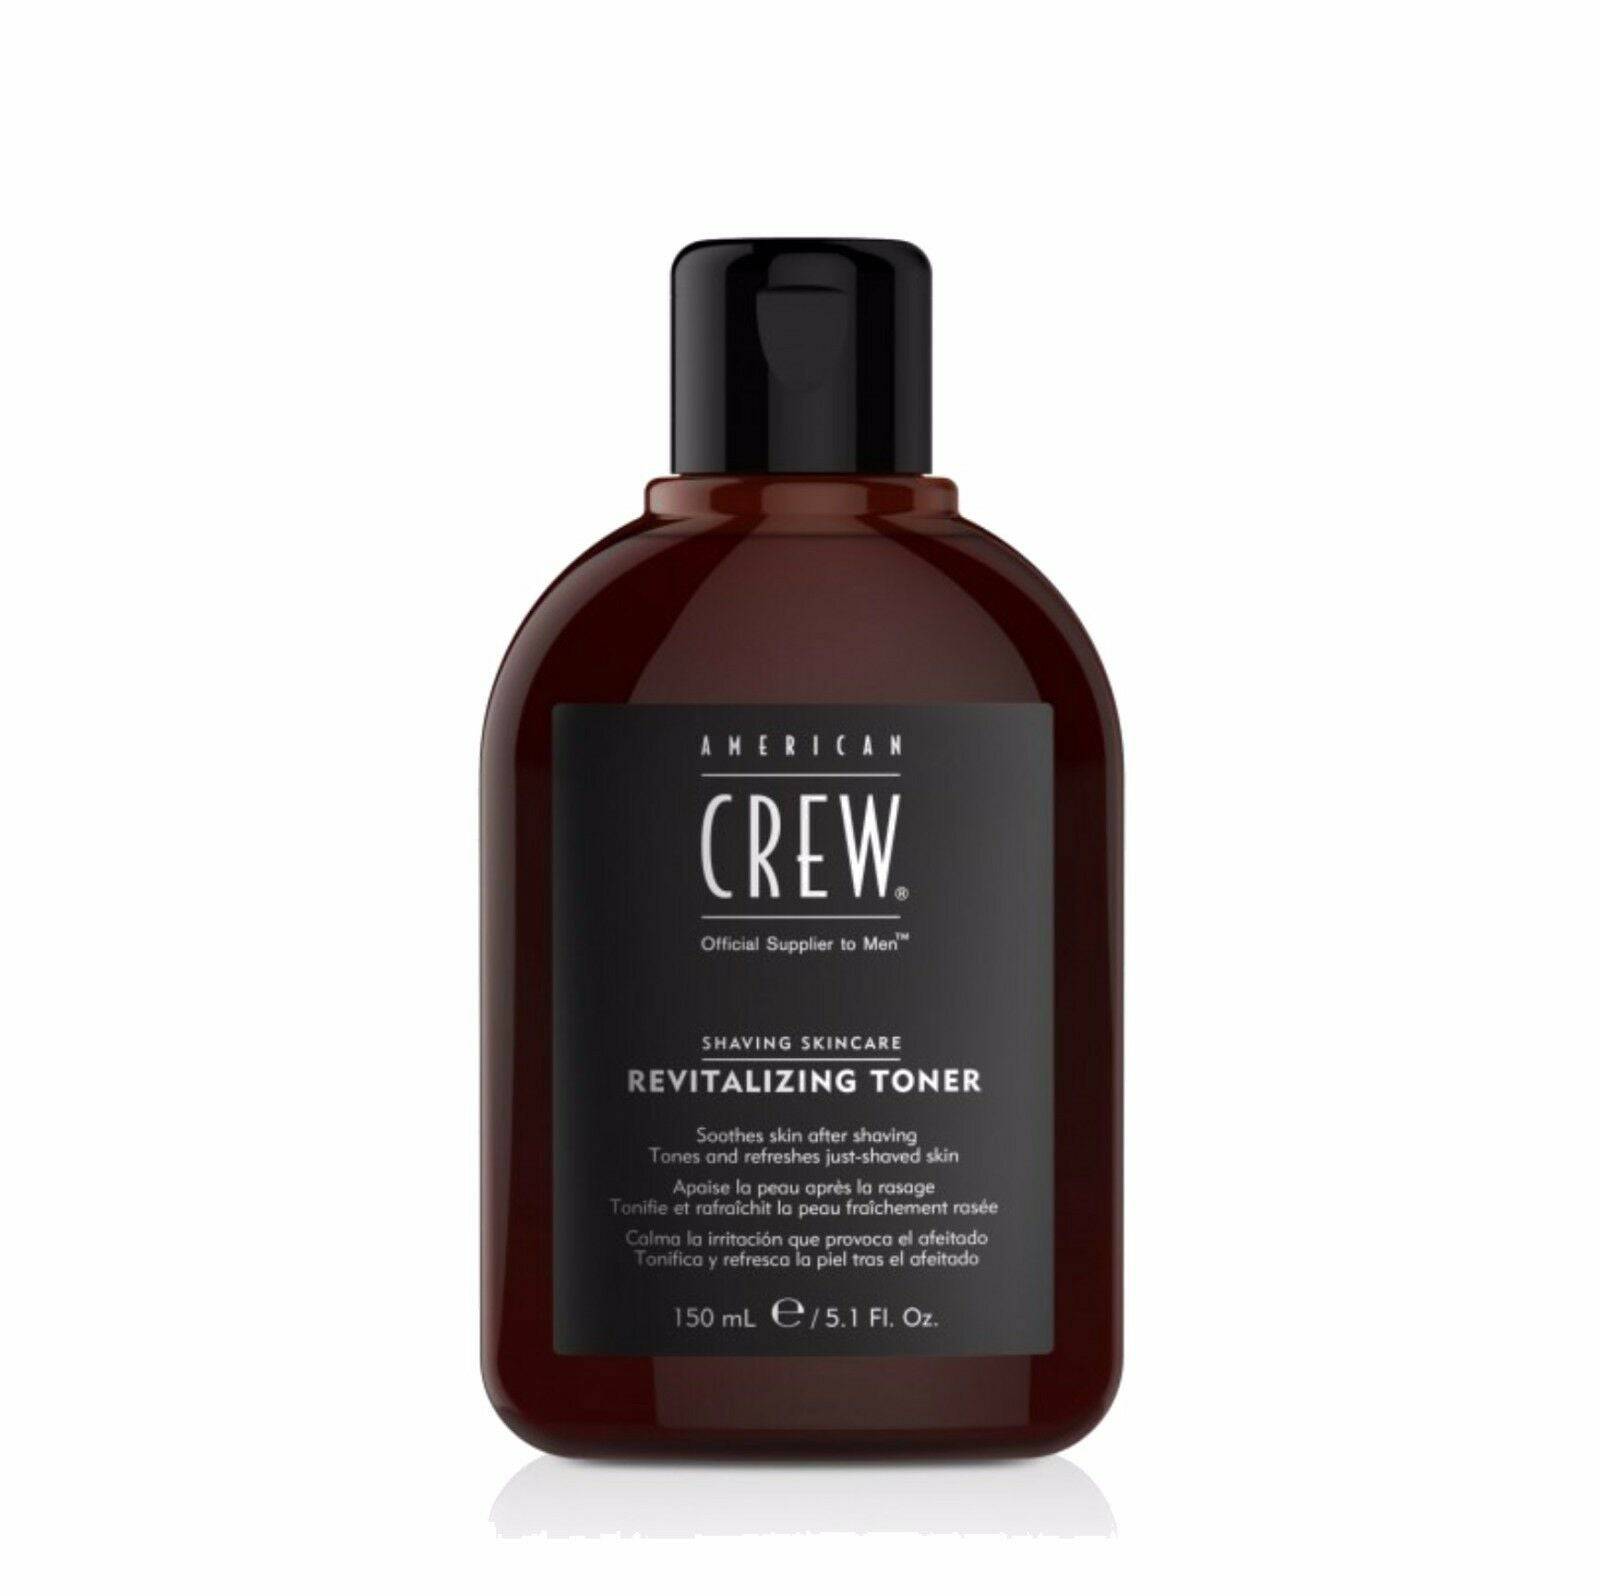 American Crew Shaving Skincare Revitalizing Toner 2 x 150ml (Duo) Soothes Skin - On Line Hair Depot